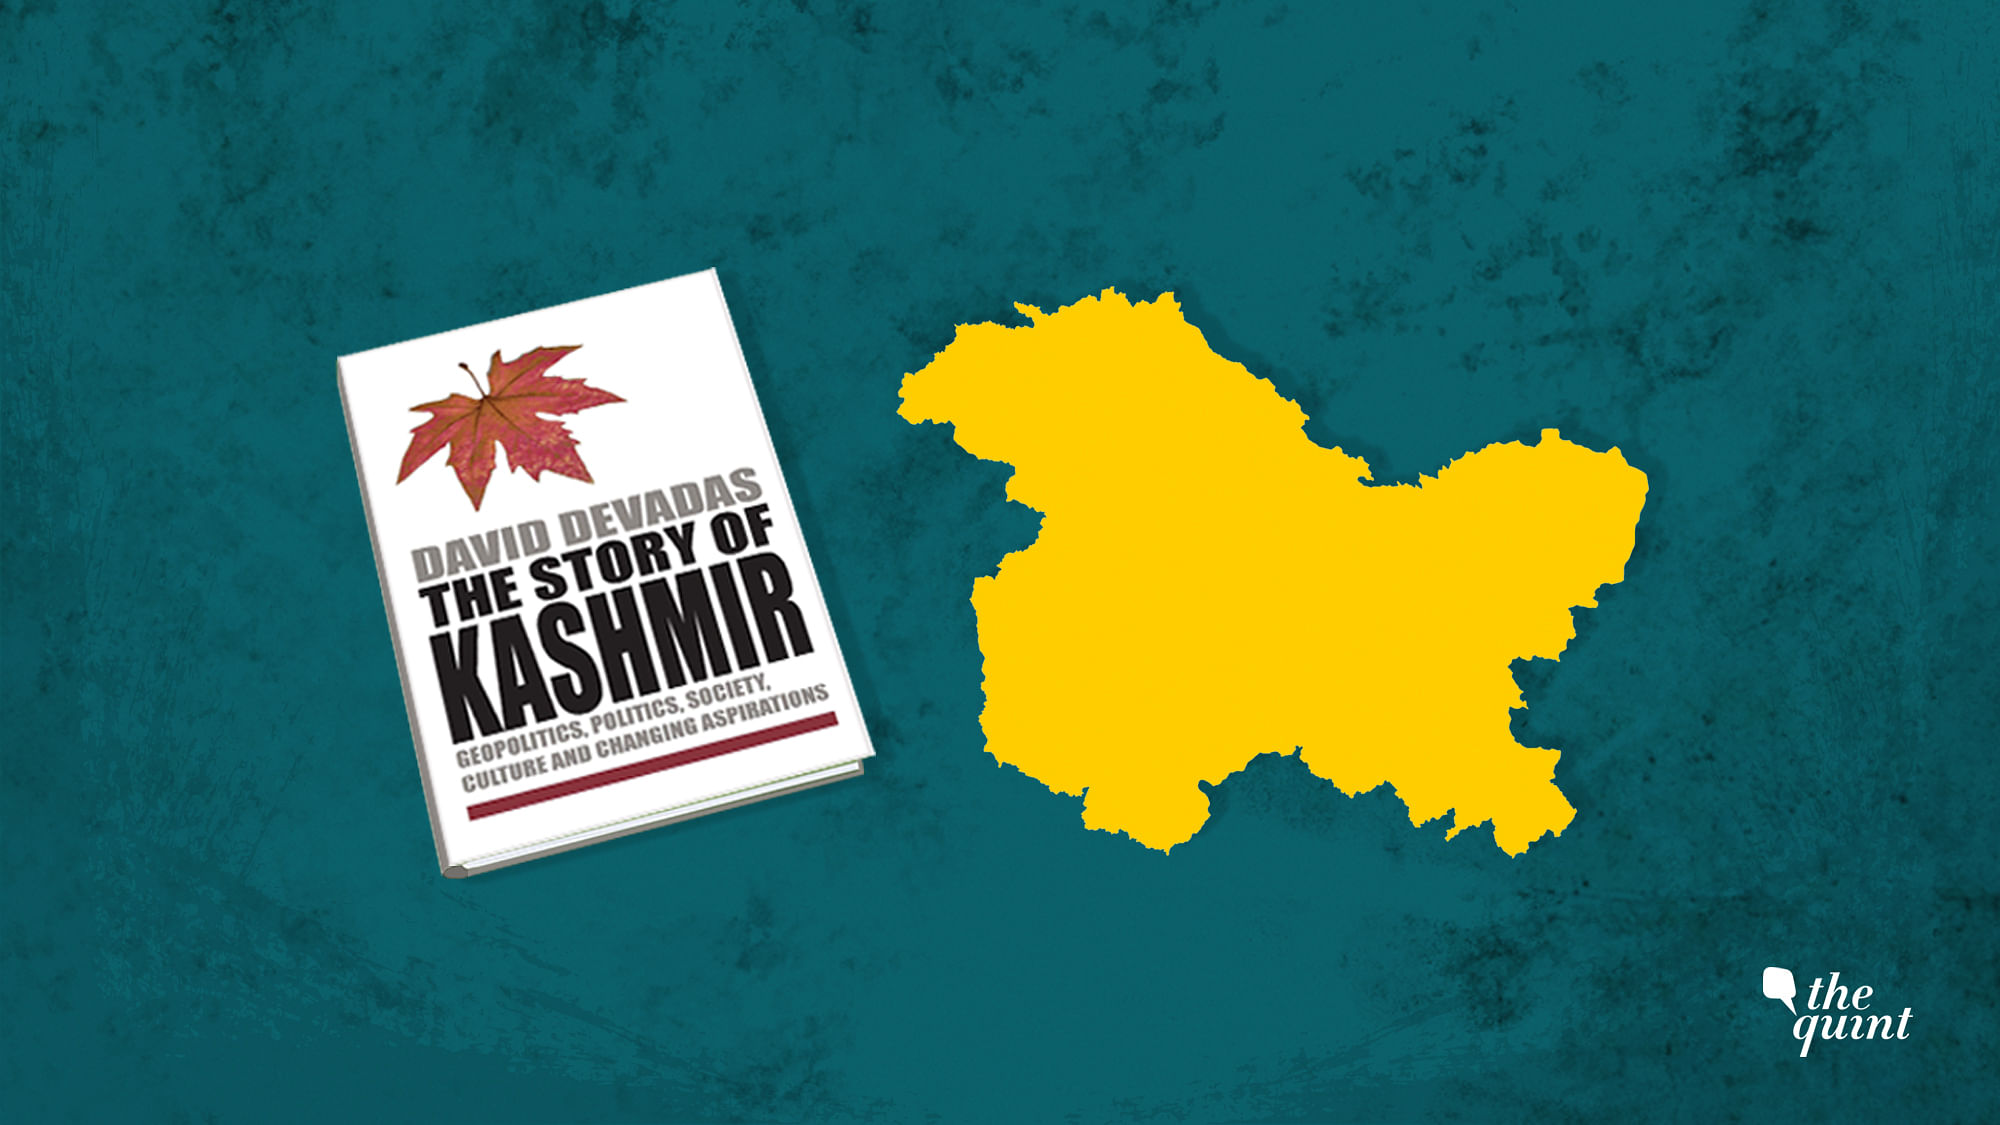 David Devadas’ book ‘The Story of Kashmir’ is a “history of the politics and changing aspirations of the region”.&nbsp;